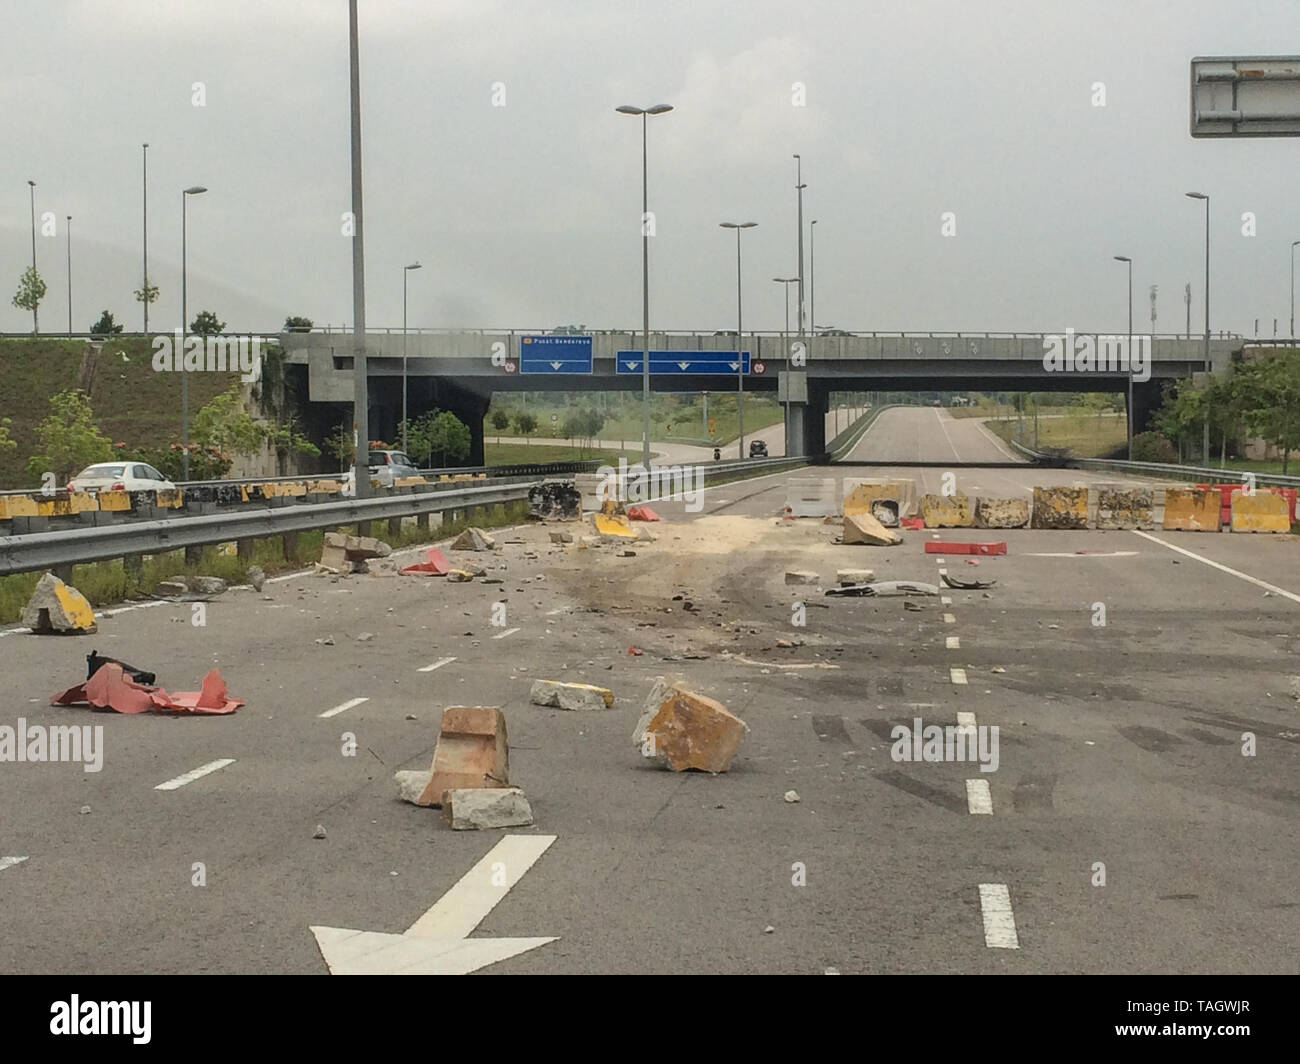 Concrete crash barrier destroyed after traffic accident Stock Photo